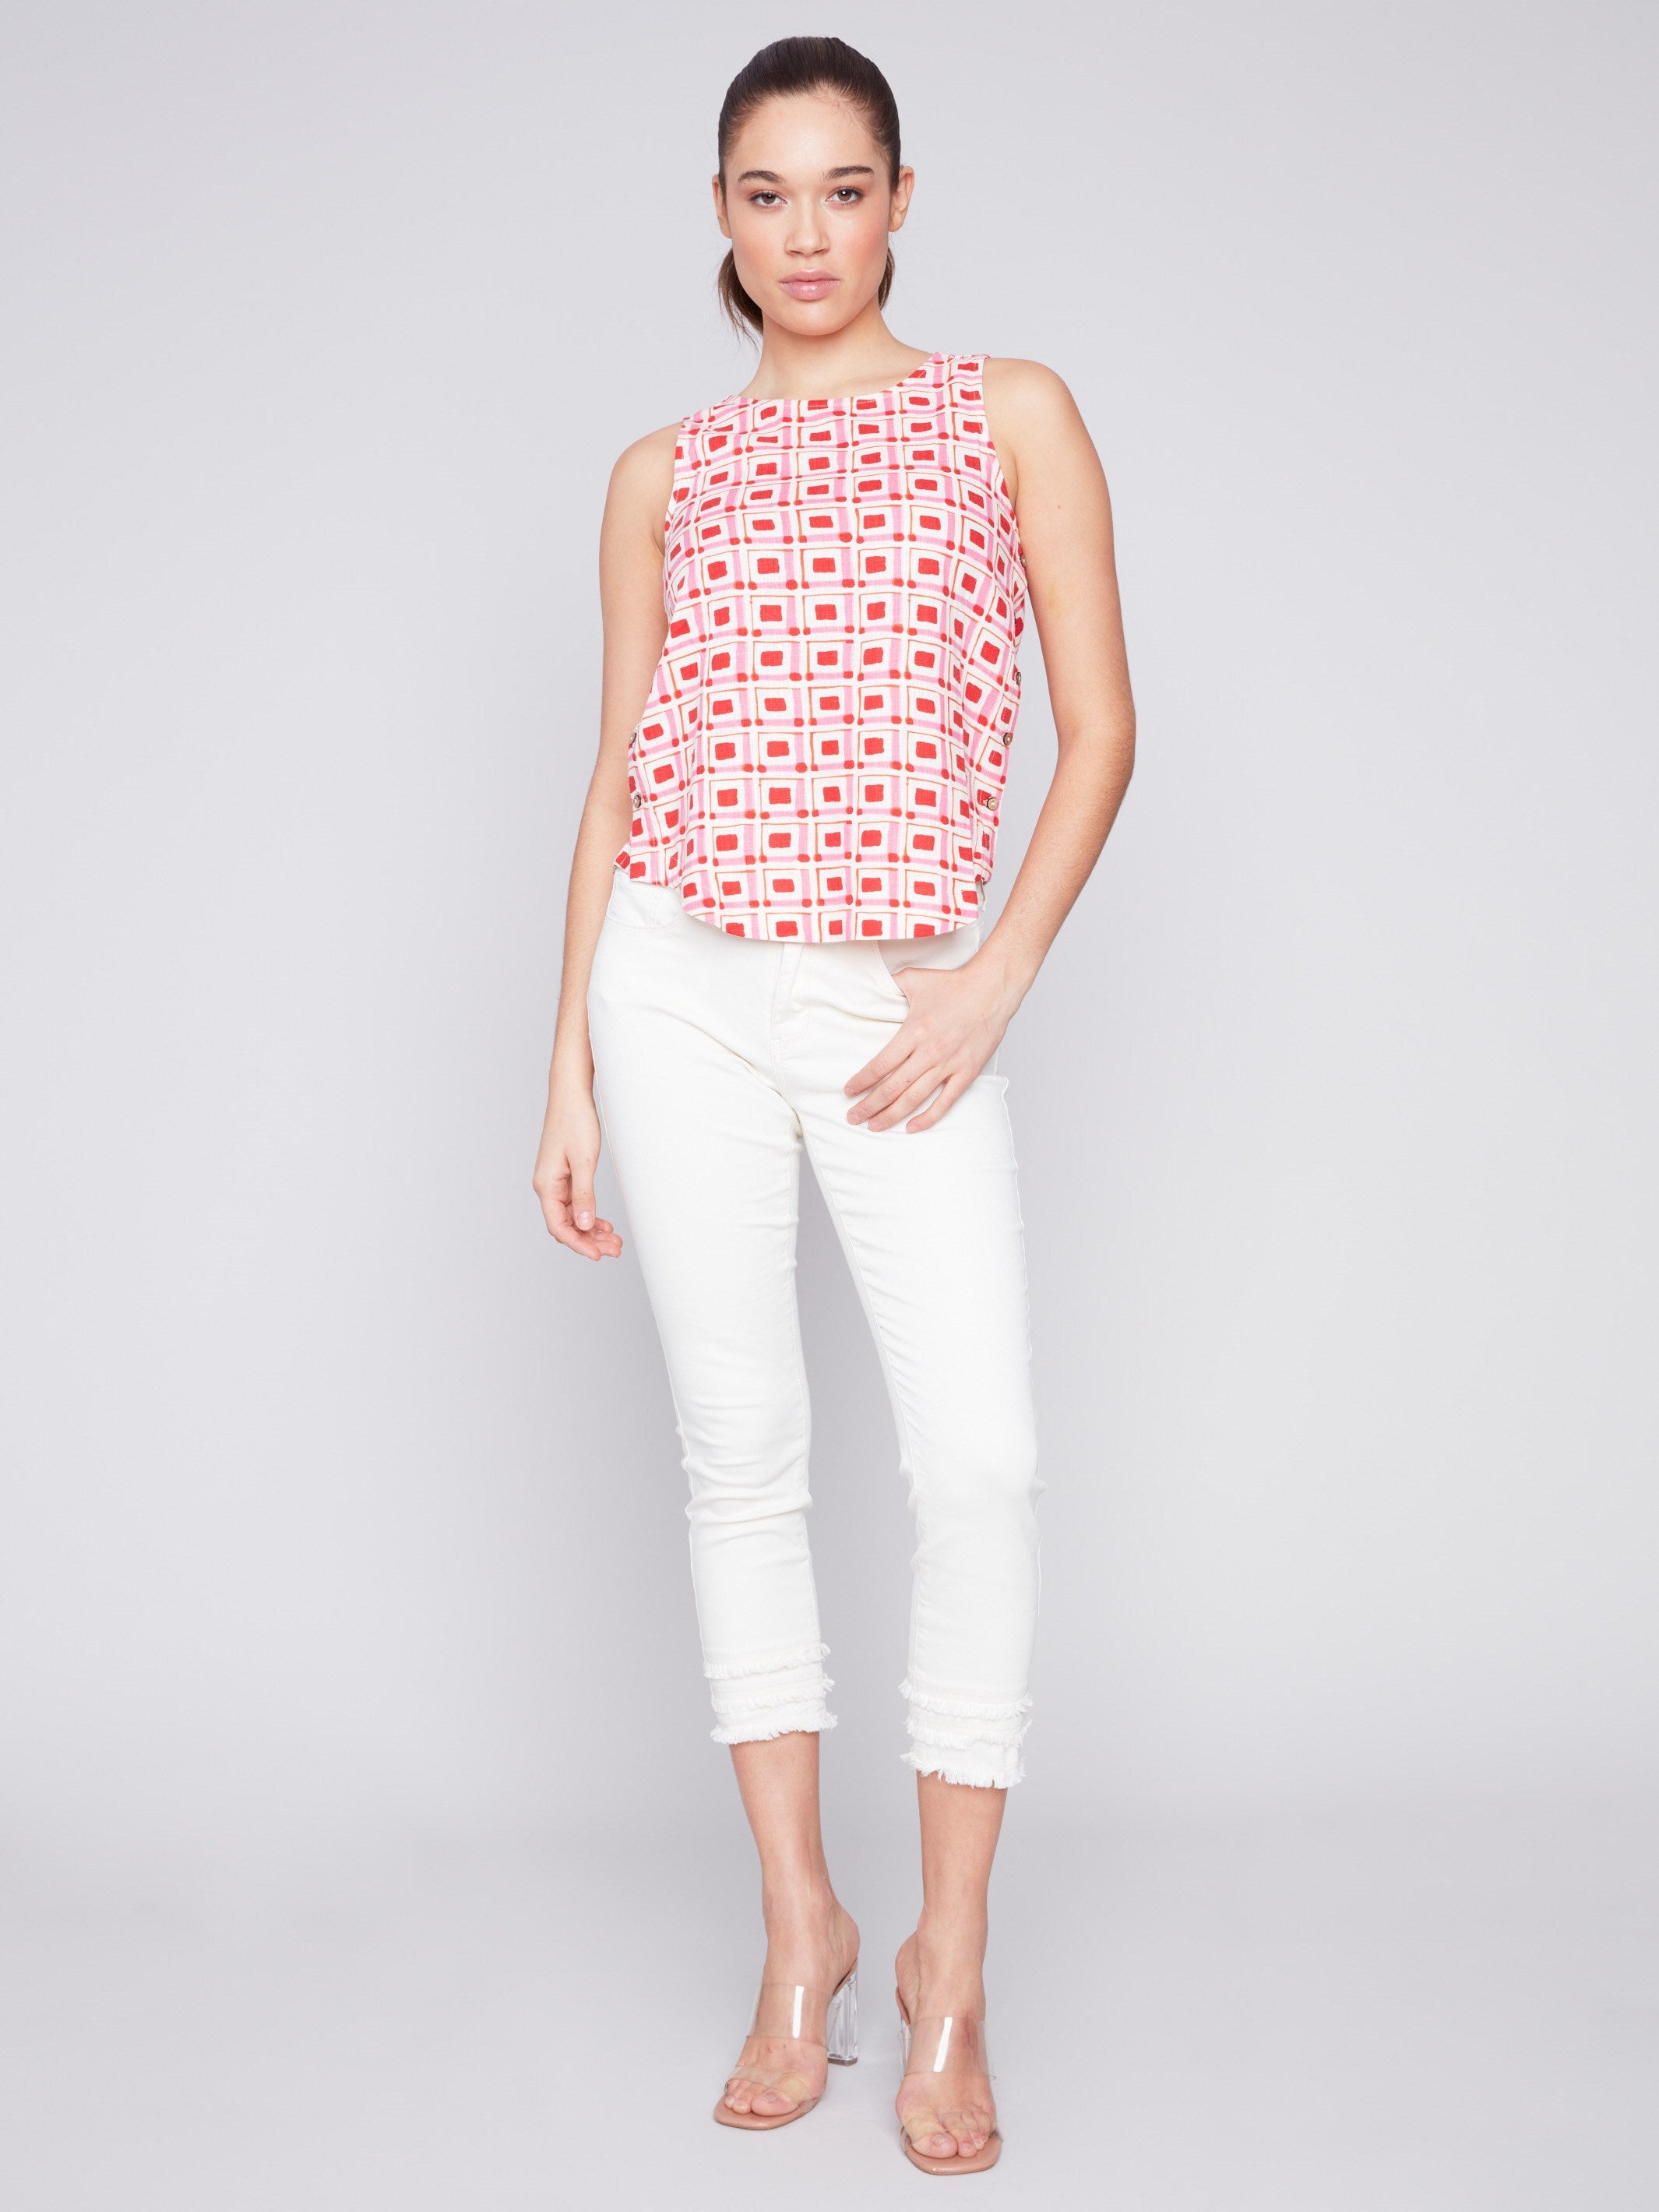 Charlie B Printed Sleeveless Top with Side Buttons - Cherry - Image 3